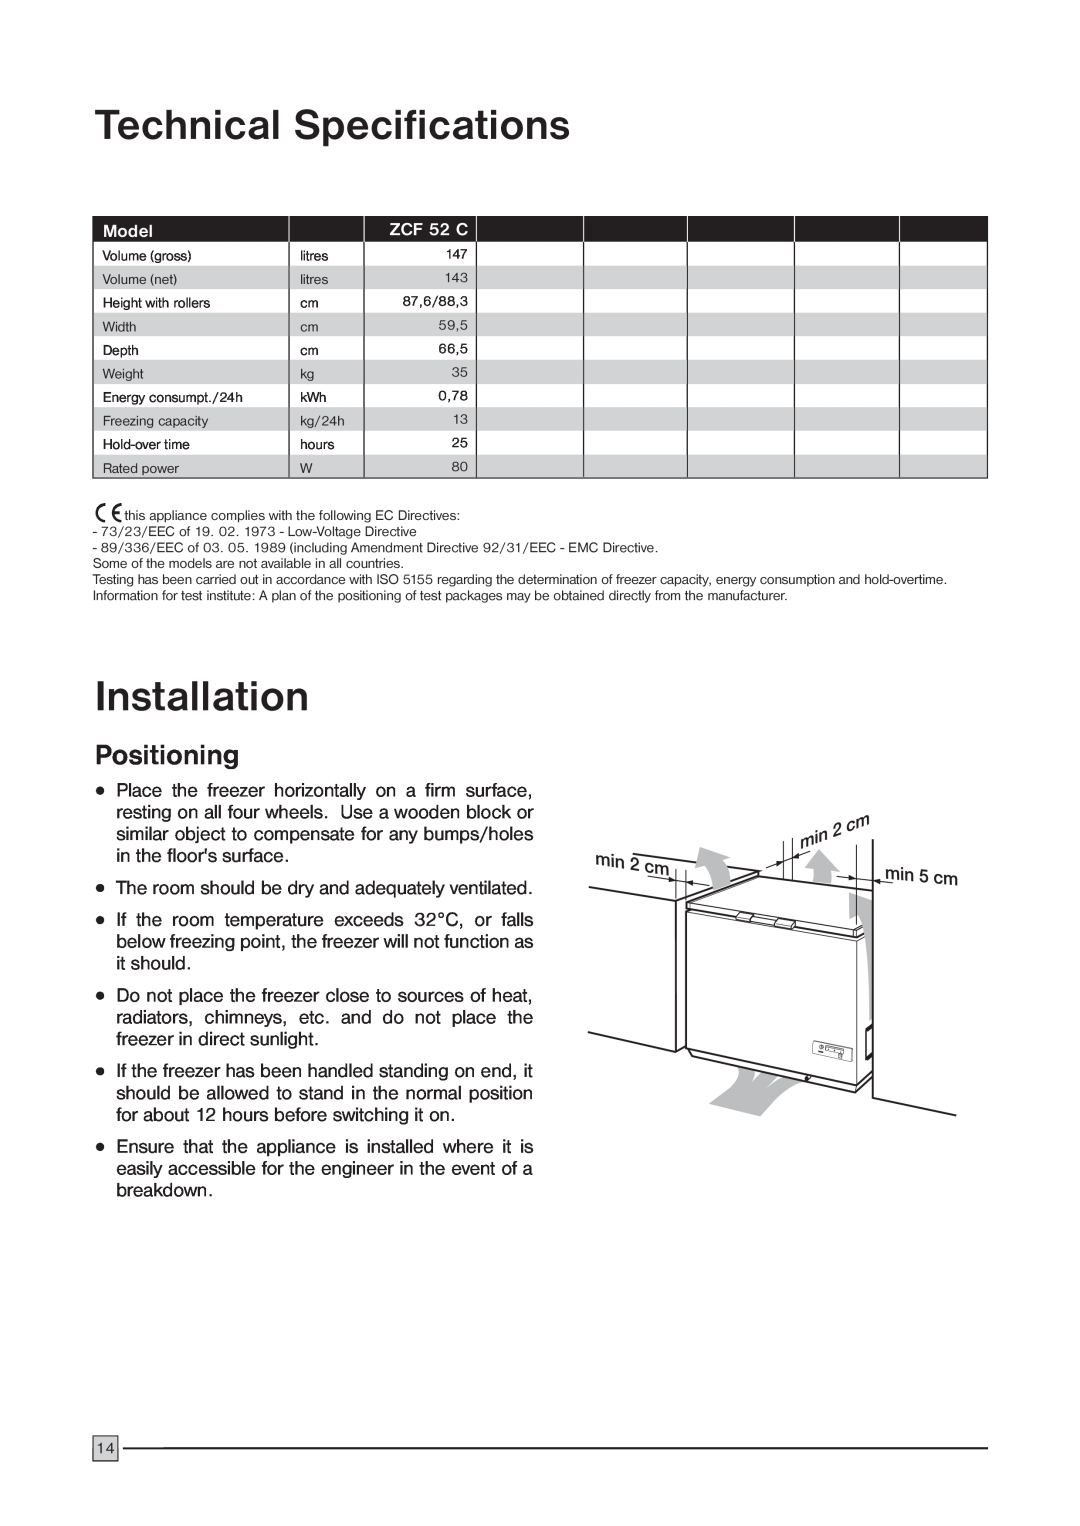 Zanussi ZCF 52 C installation manual Technical Specifications, Installation, Positioning 